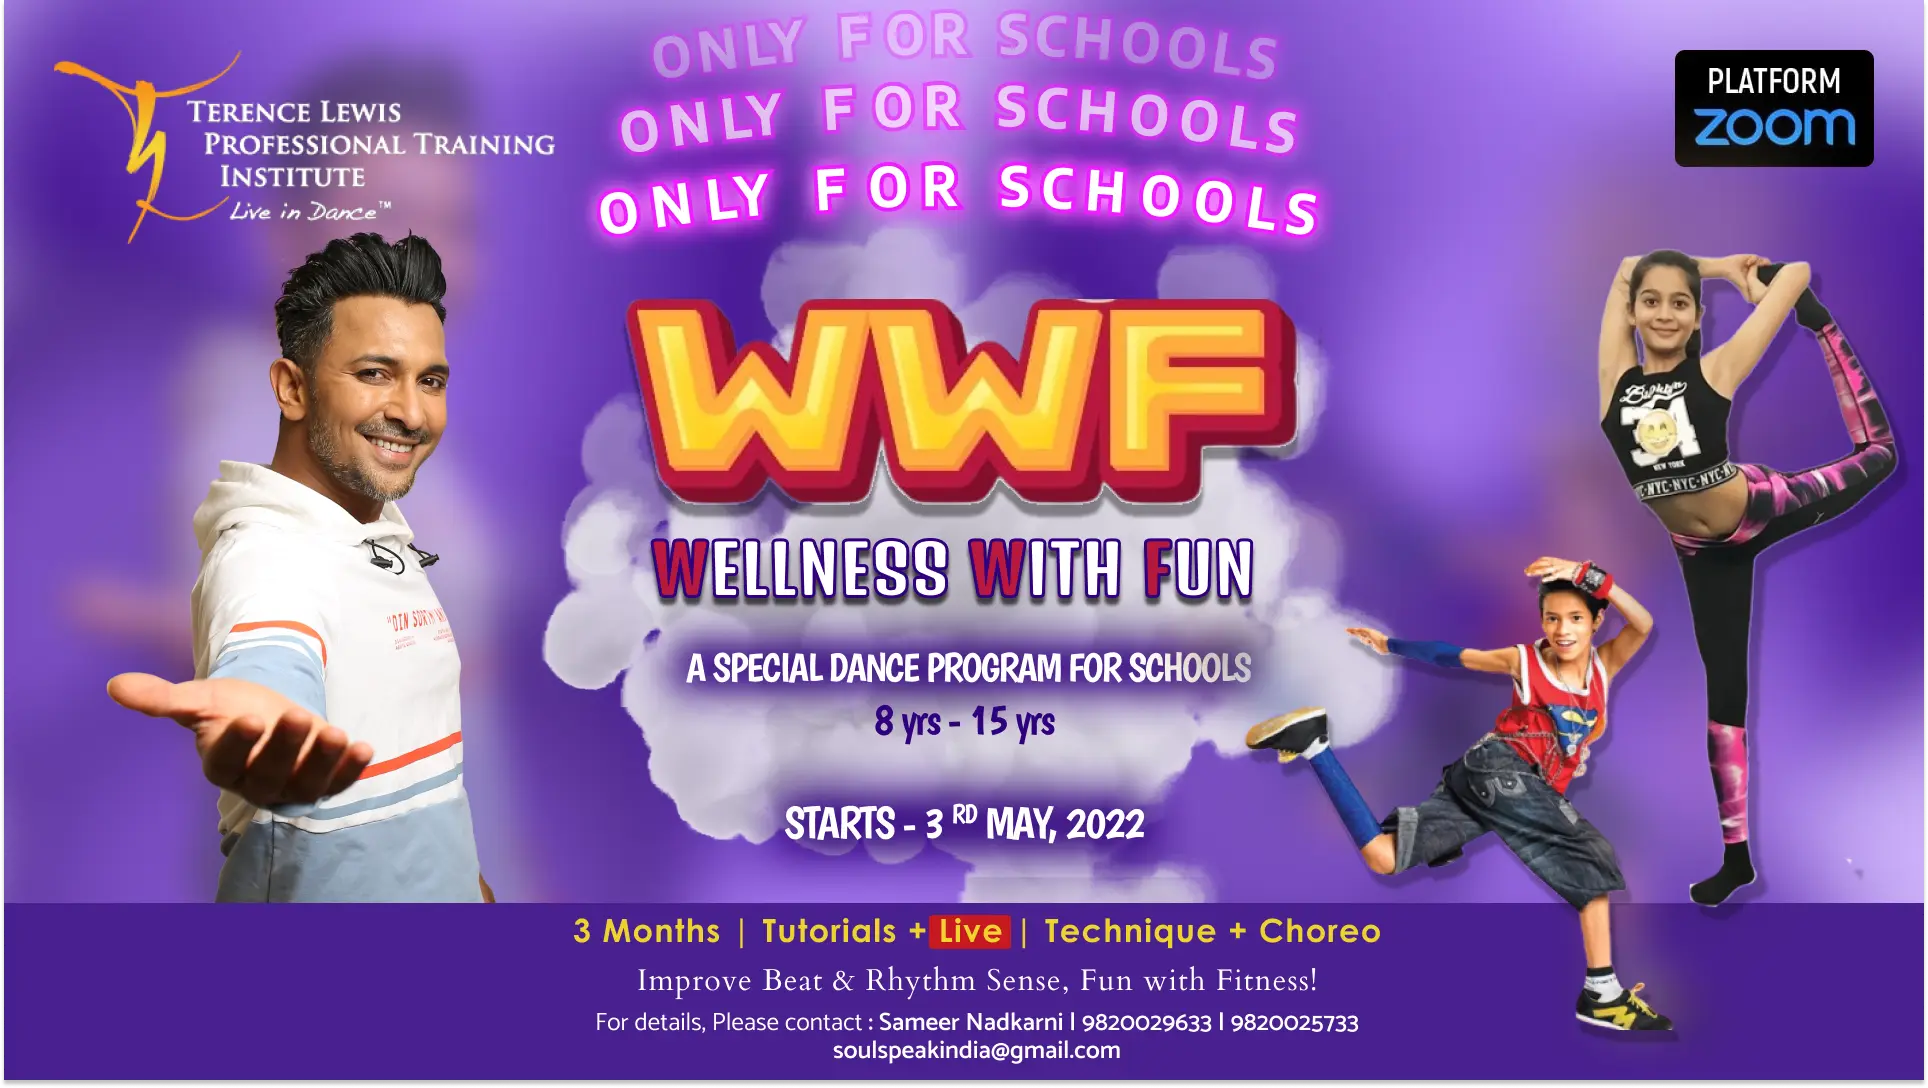 Special Dance Course Only for Schools - WWF (Wellness With Fun)